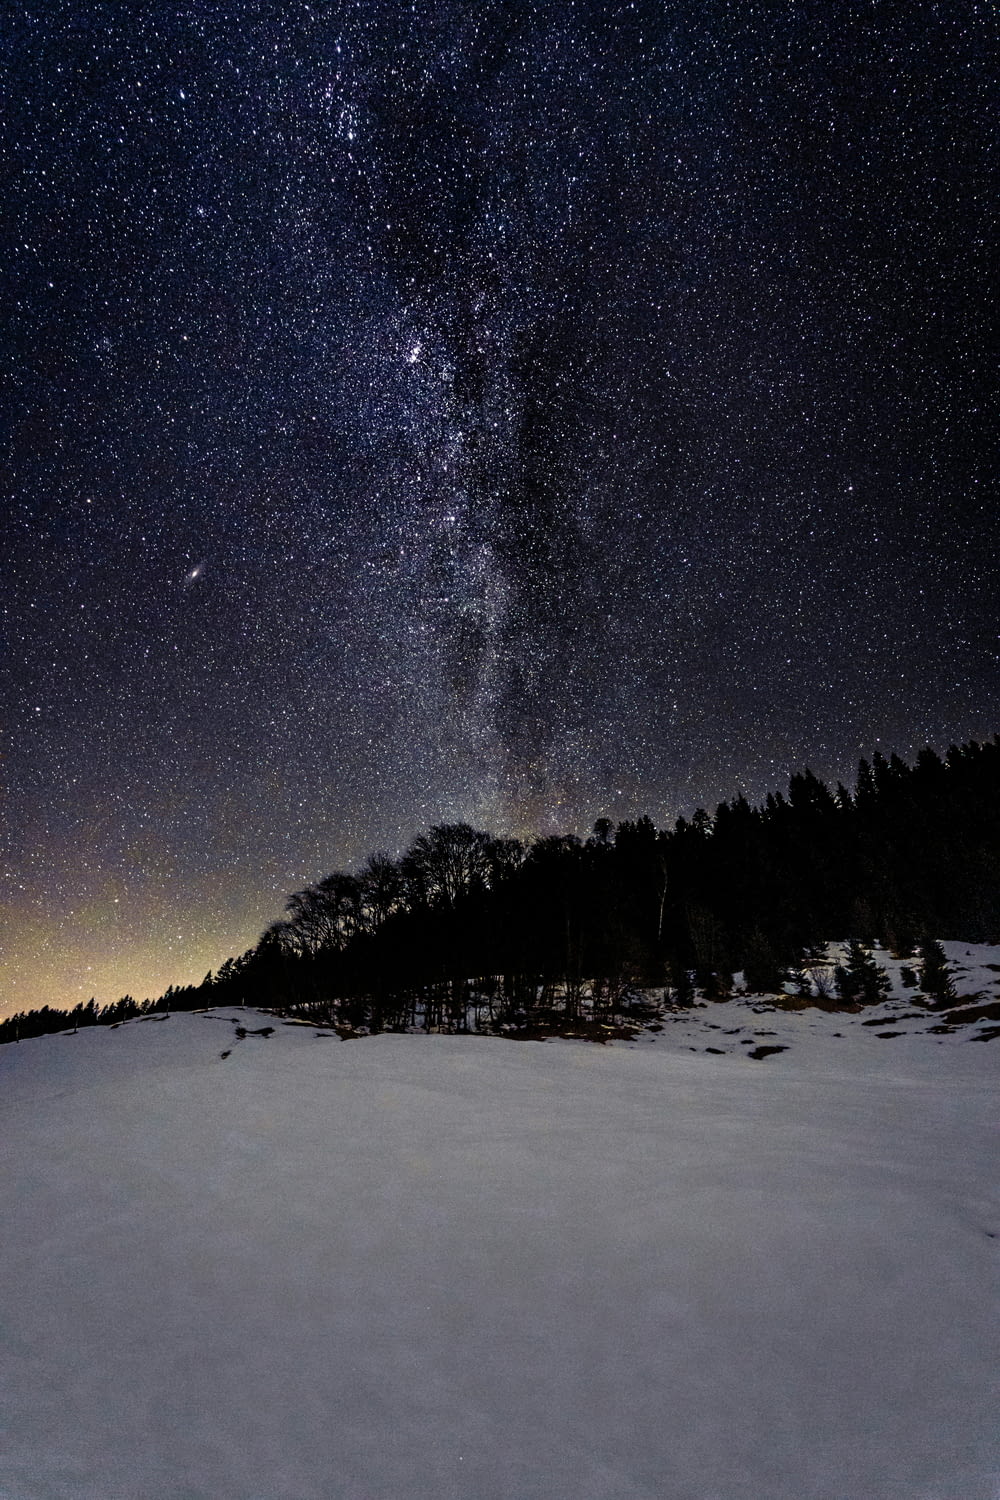 the night sky is filled with stars above a snowy field